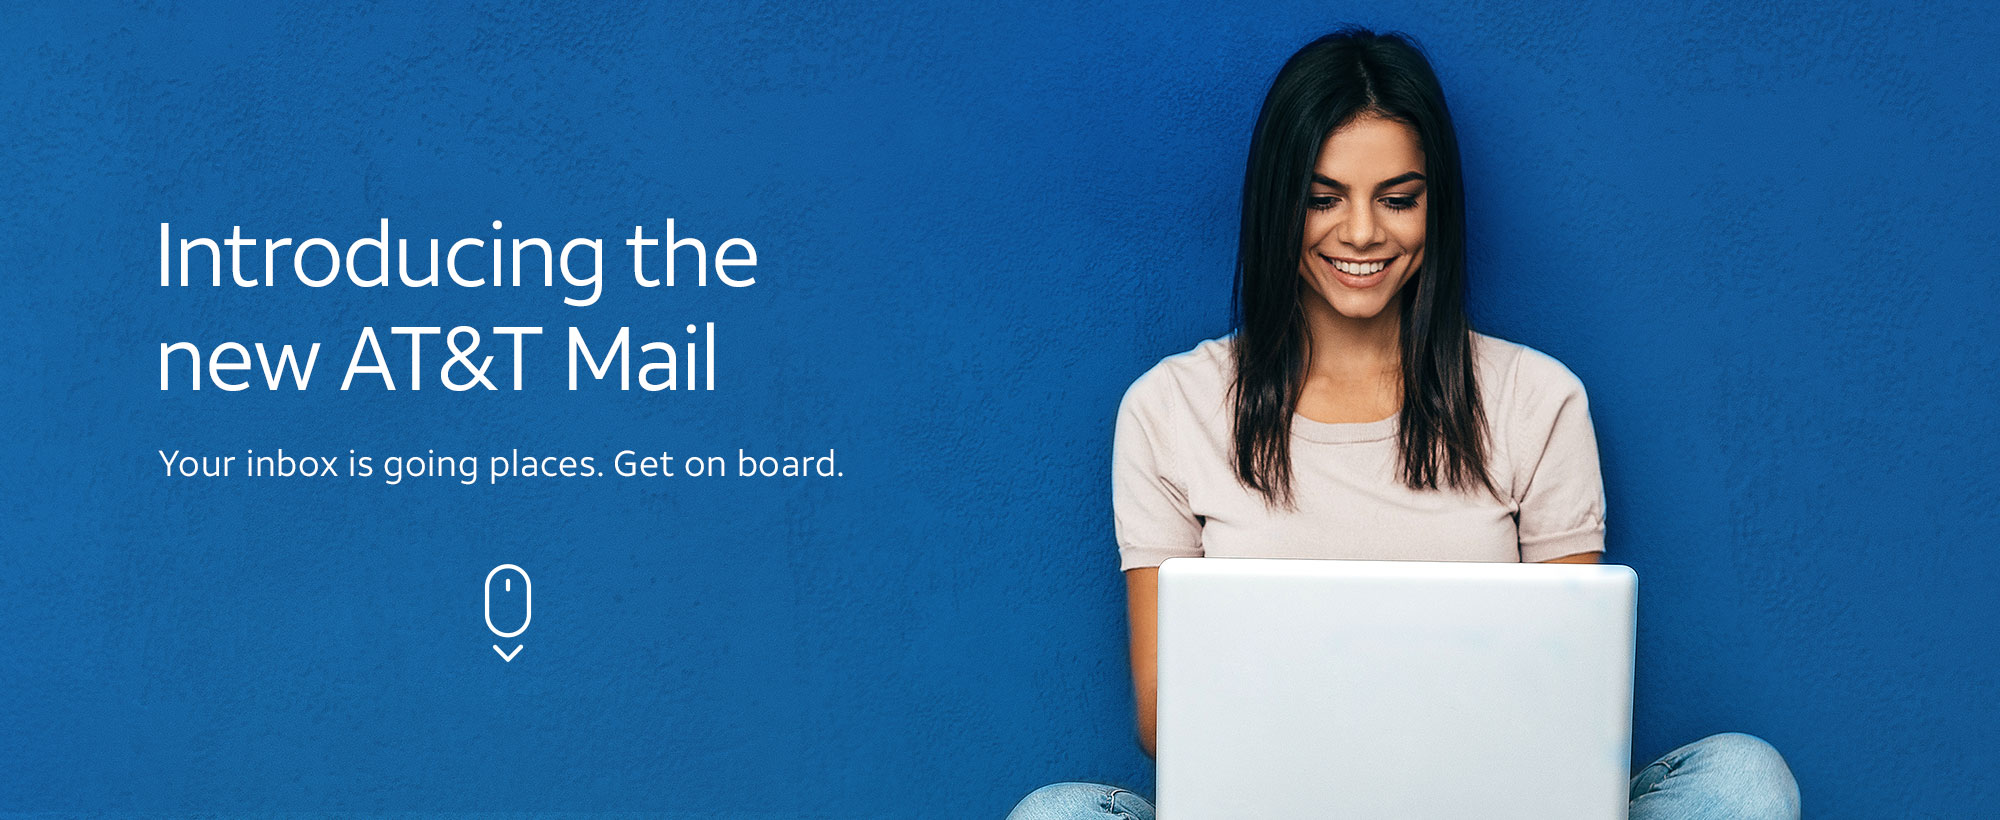 AT&T Mail user accessing att.net and Currently email login